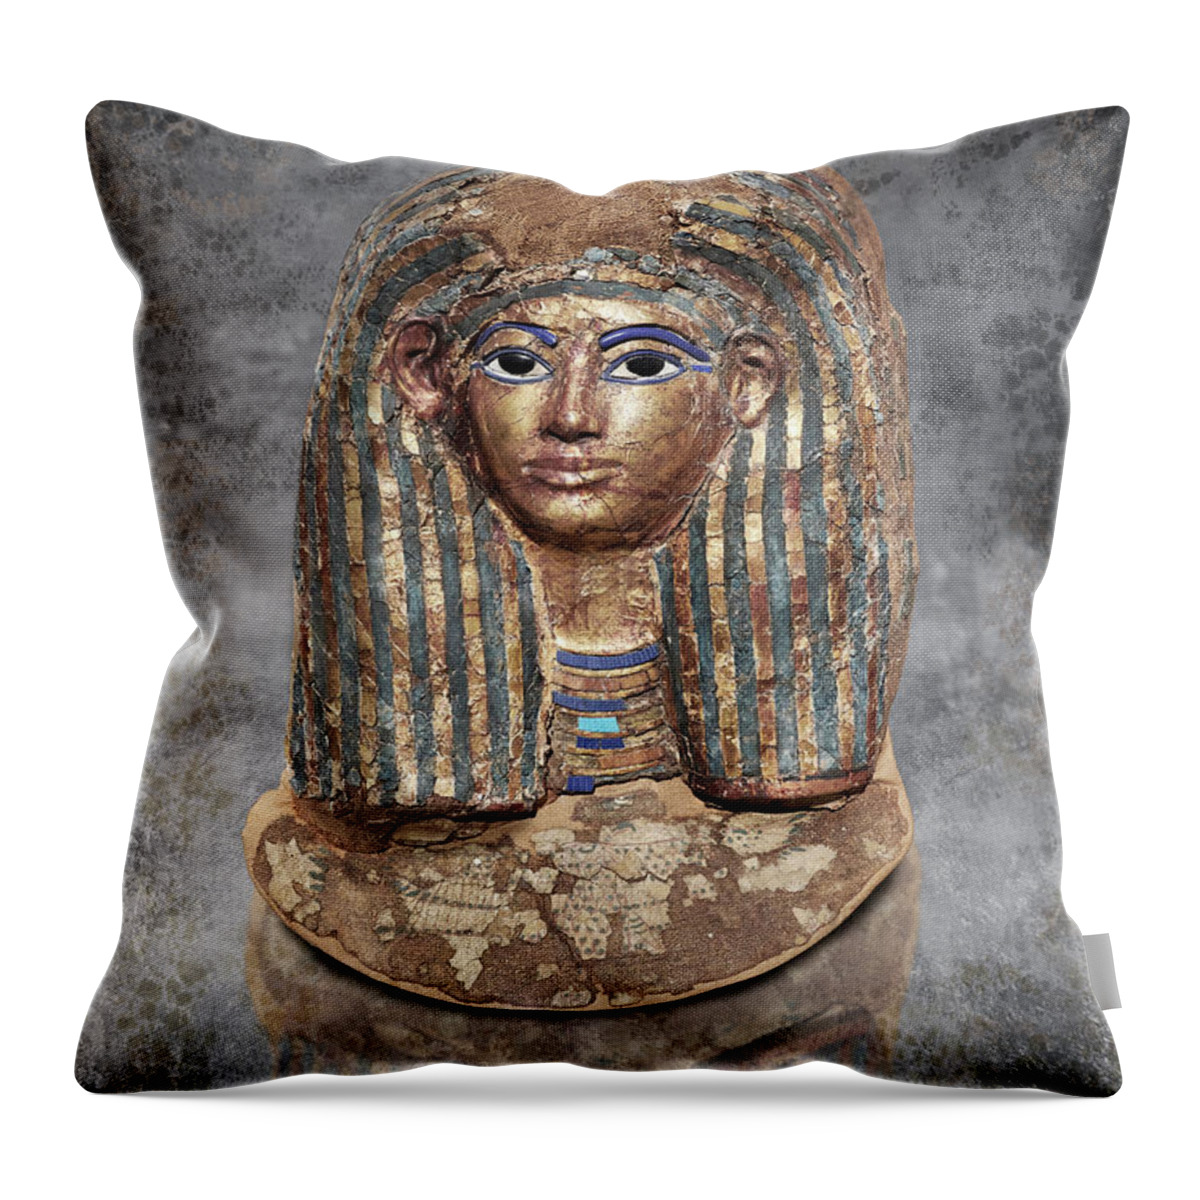 Cartonnage Funerary Mask Throw Pillow featuring the sculpture The After life - Photo of Ancient Egyptian funerary mask of Merit by Paul E Williams